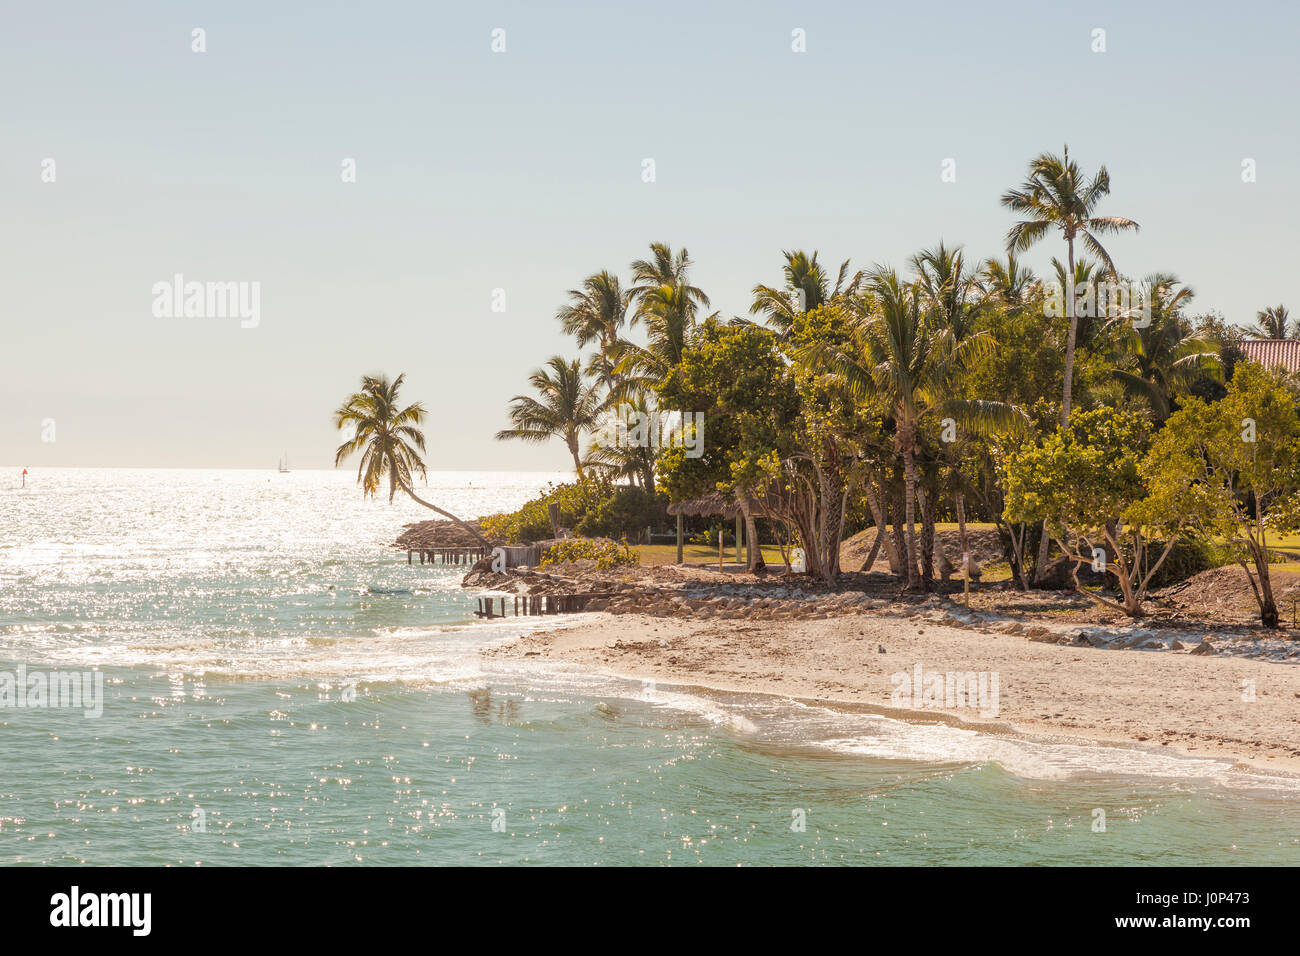 Tropical beach with coconut palm trees in the city of Naples, Florida, United States Stock Photo